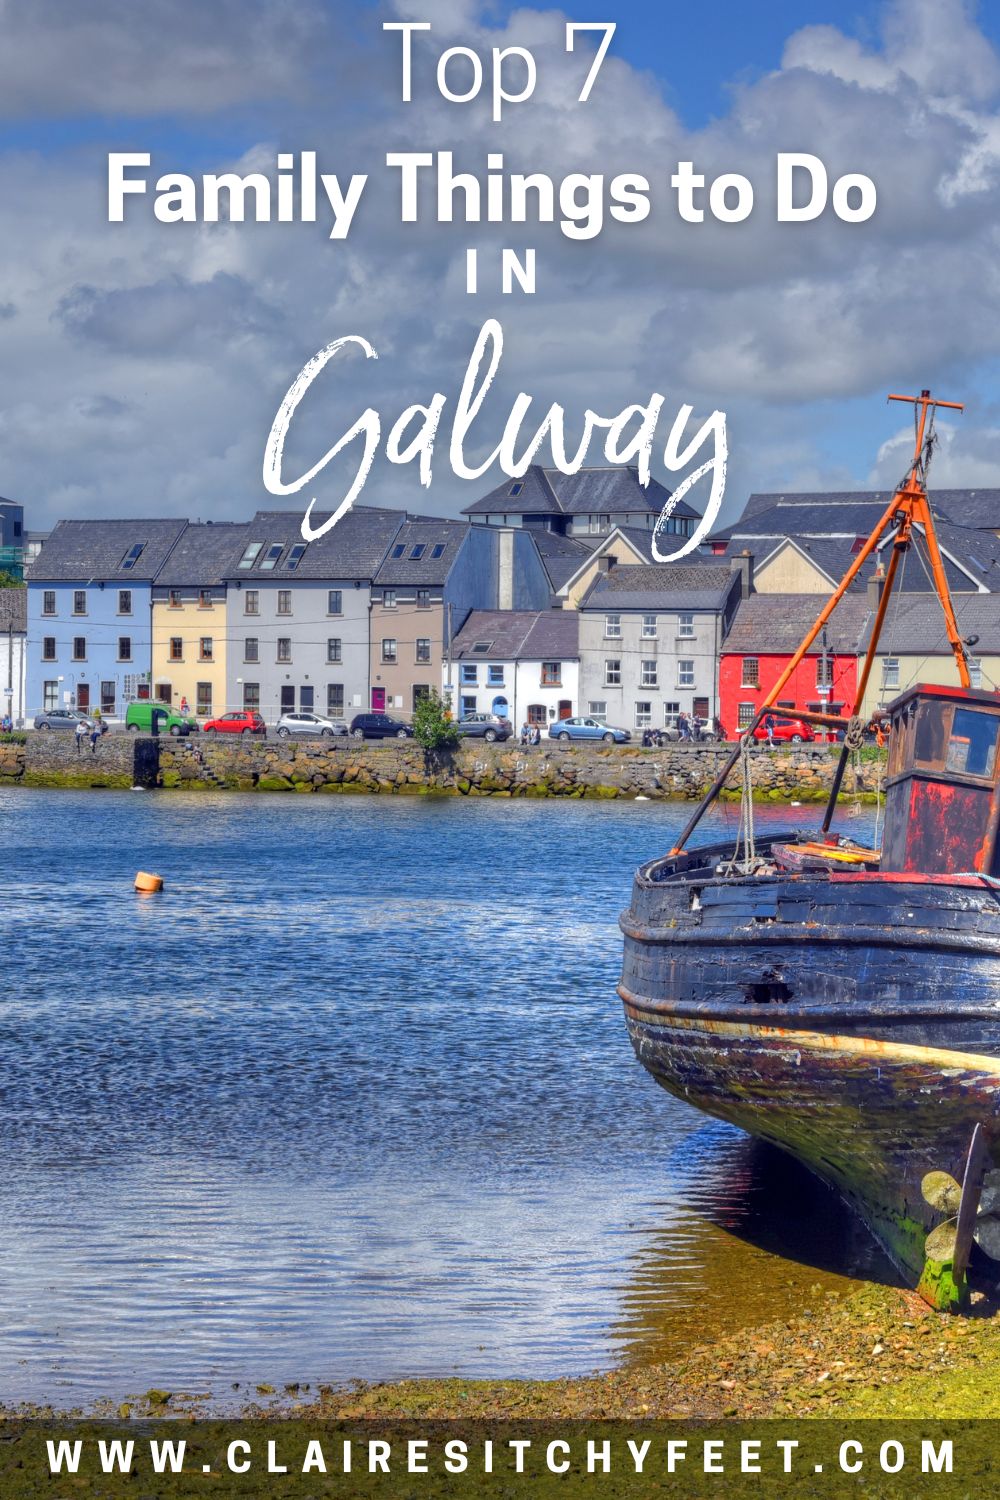 Family Things to Do in Galway,galway,galway travel,galway vacation,family things,to do in galway,family vacation